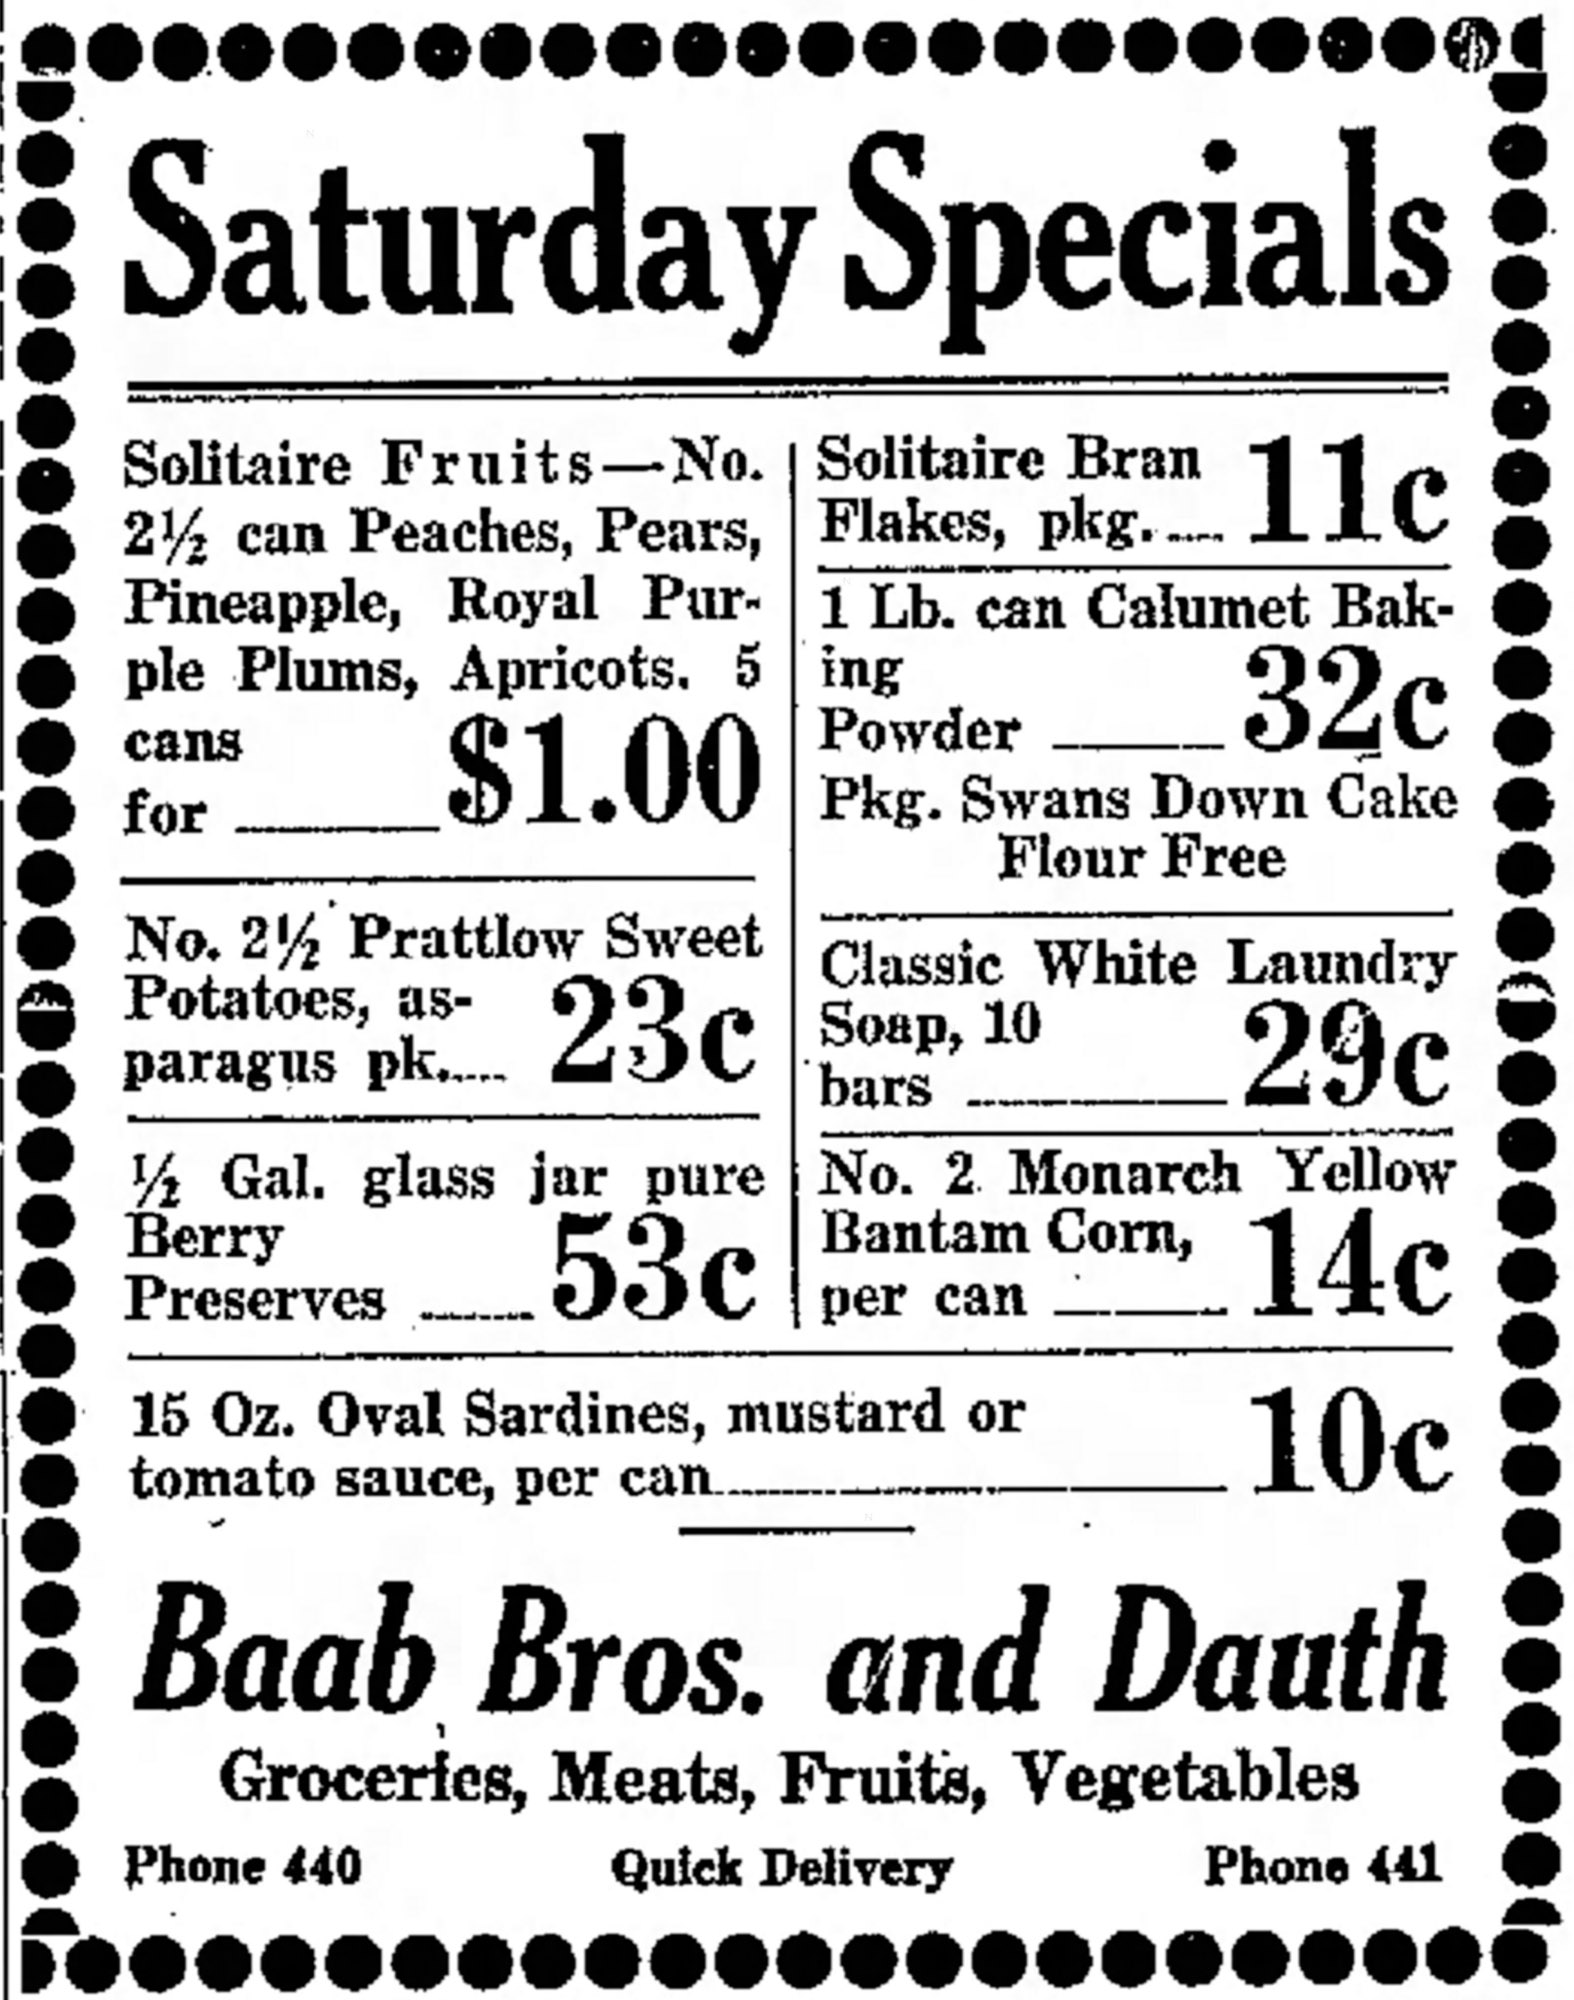 Dauth Family Archive - 1932-01-22 - Greeley Daily Tribune - Baab Bros and Dauth Advertisement